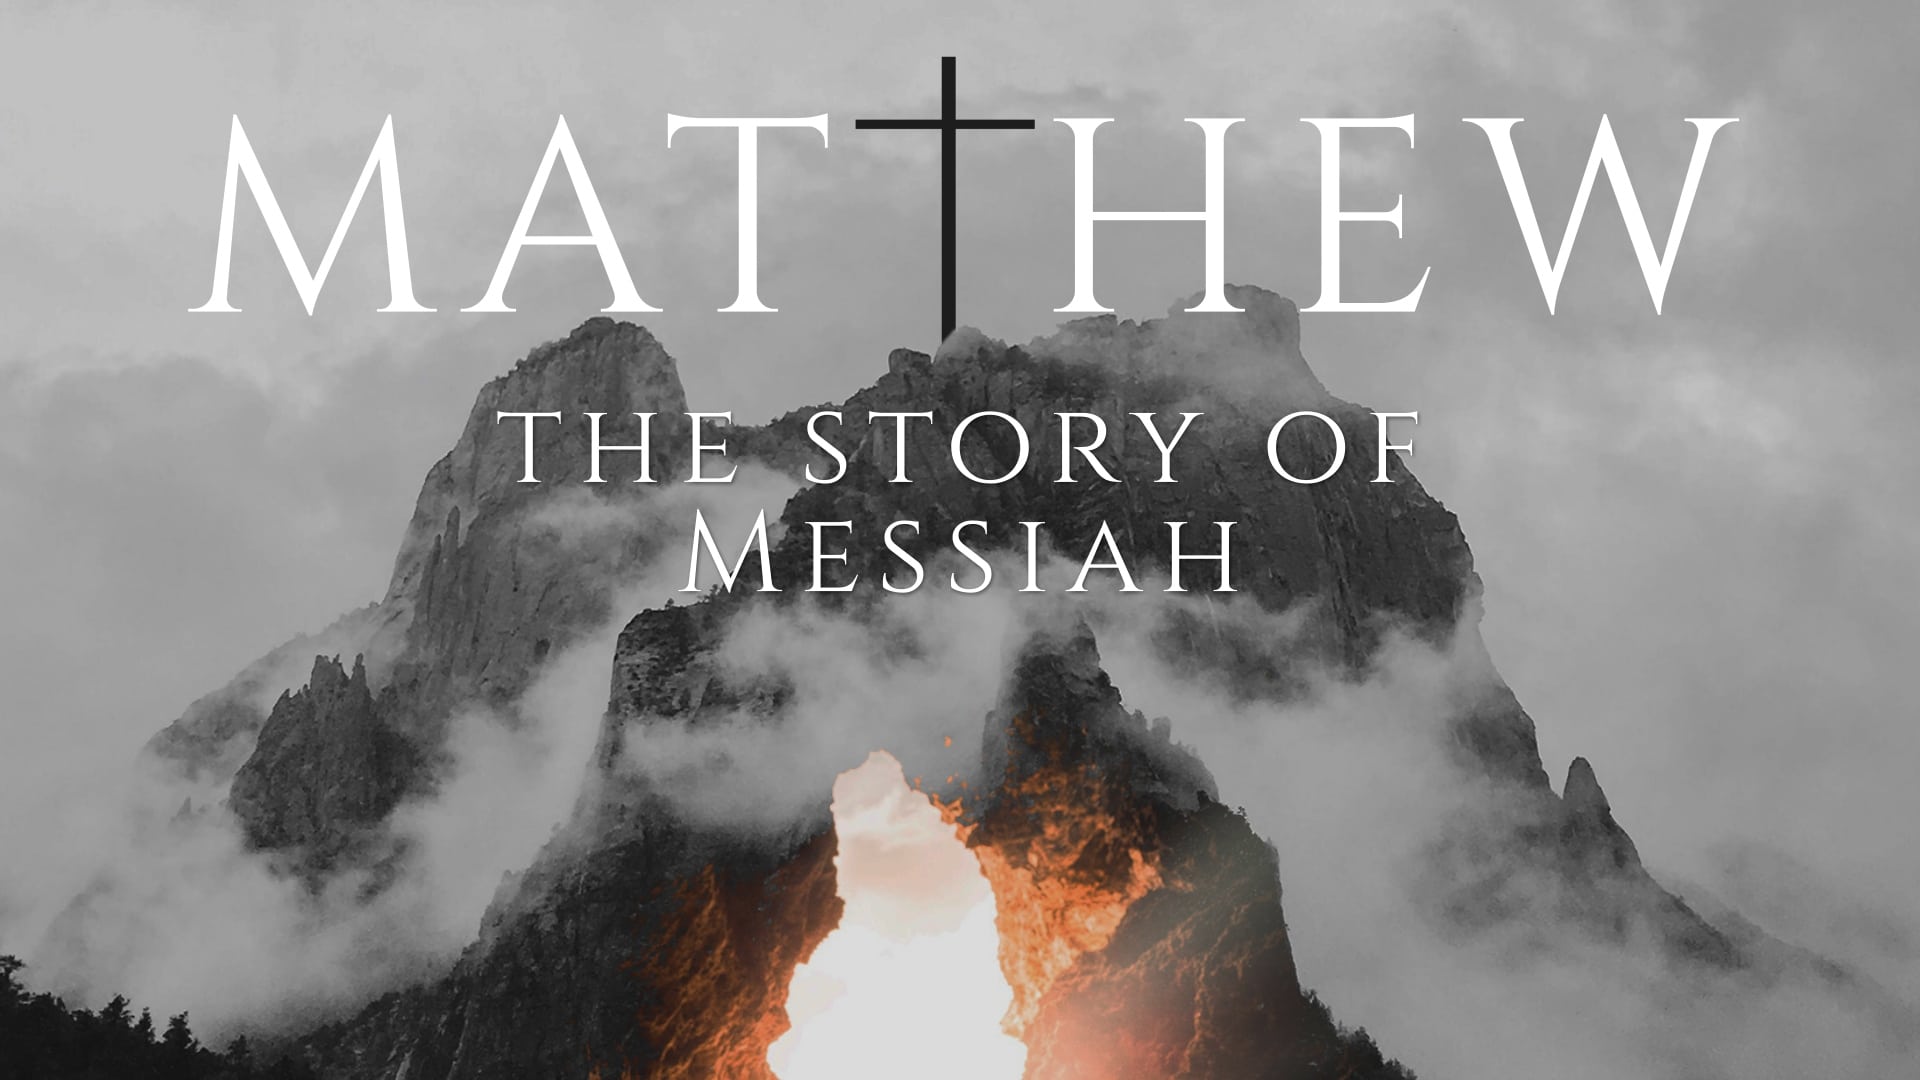 Matthew 28: The Great Commission (Matthew: The Story of Messiah) Image